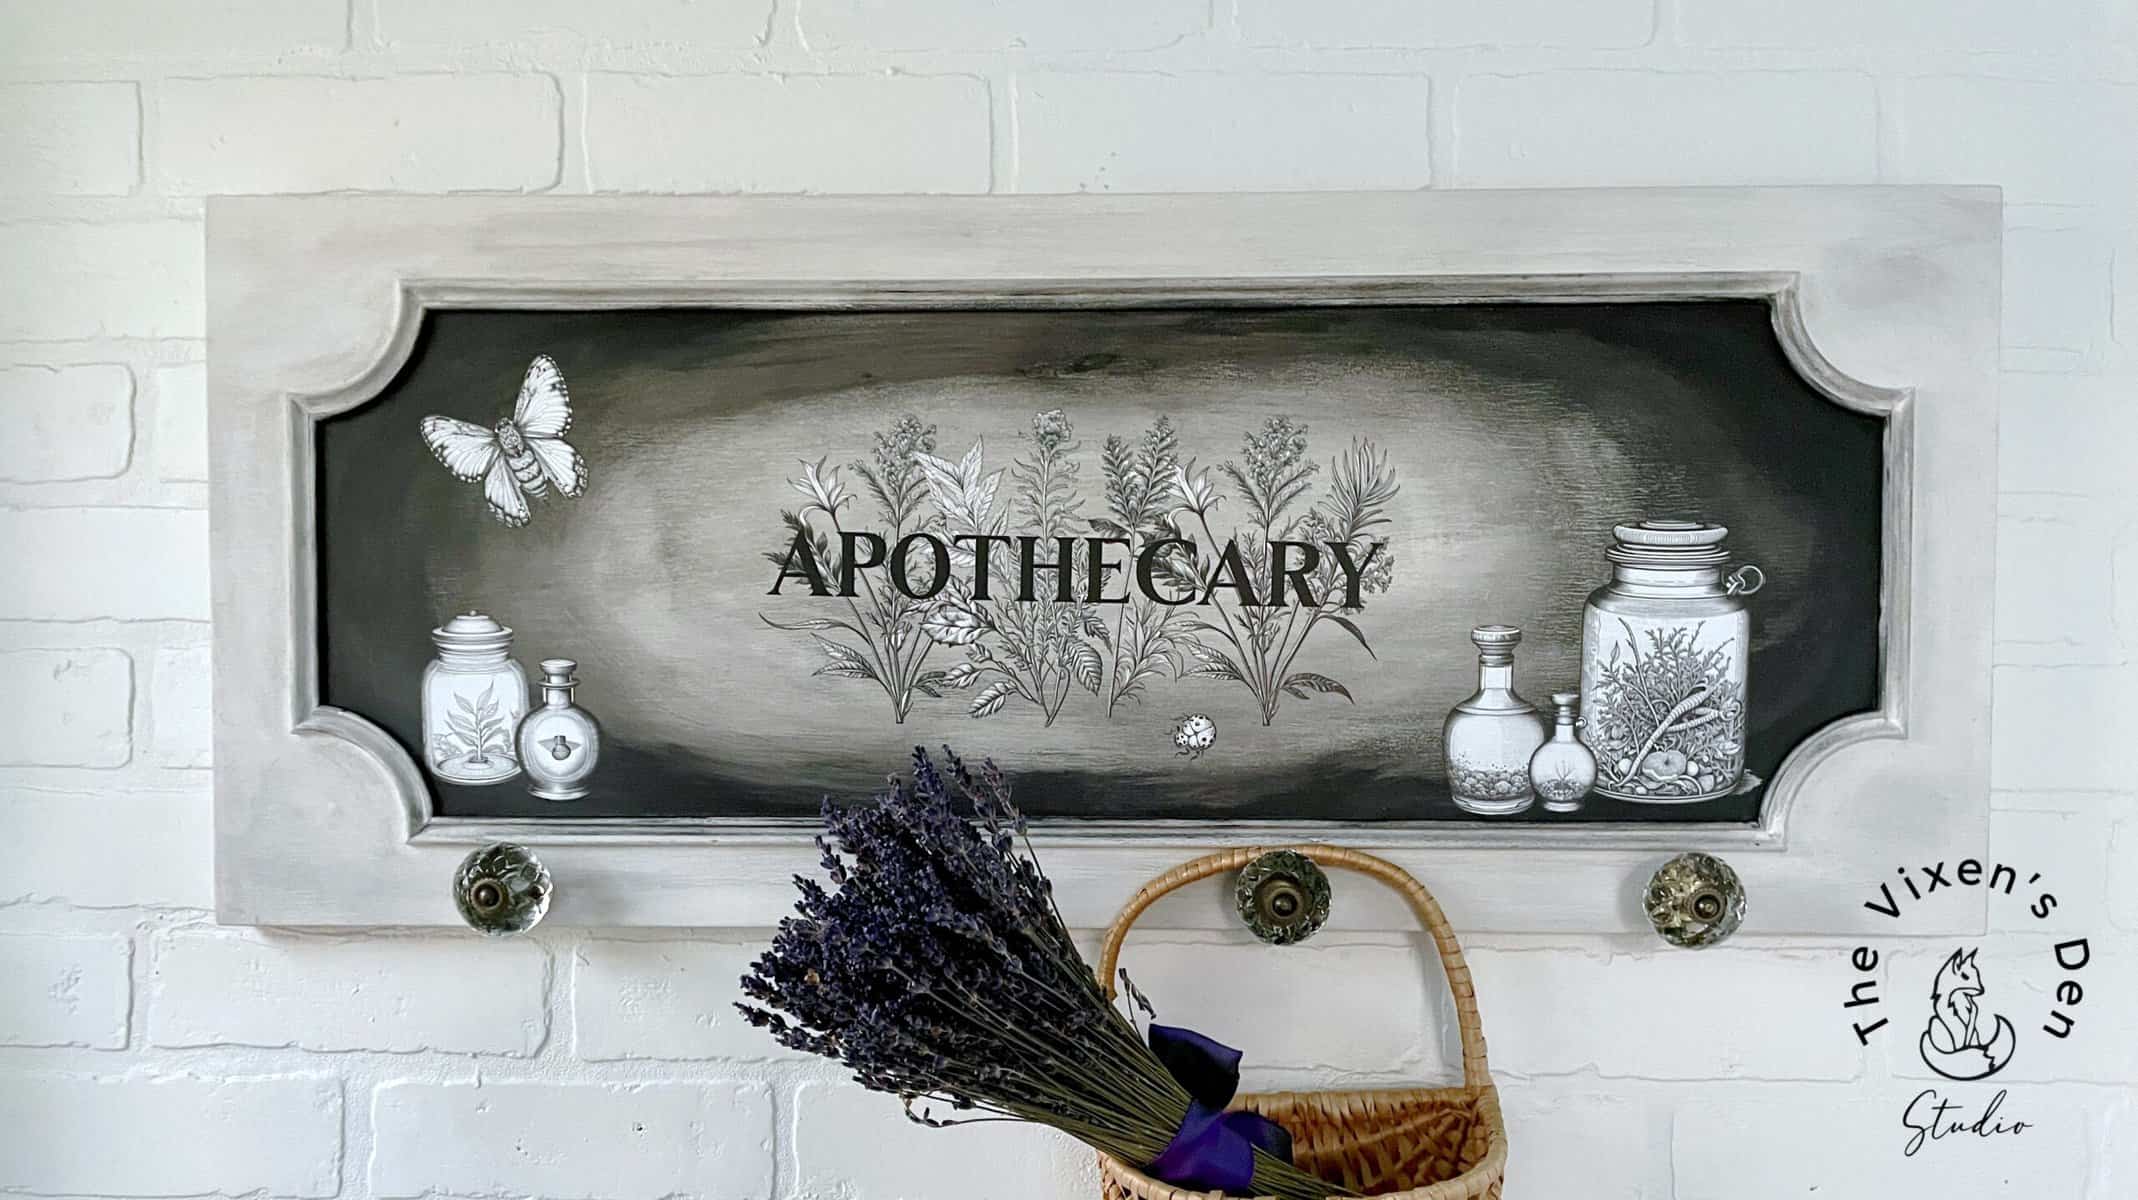 Cabinet Door Upcycle: Apothecary Transfer Wall Organizer